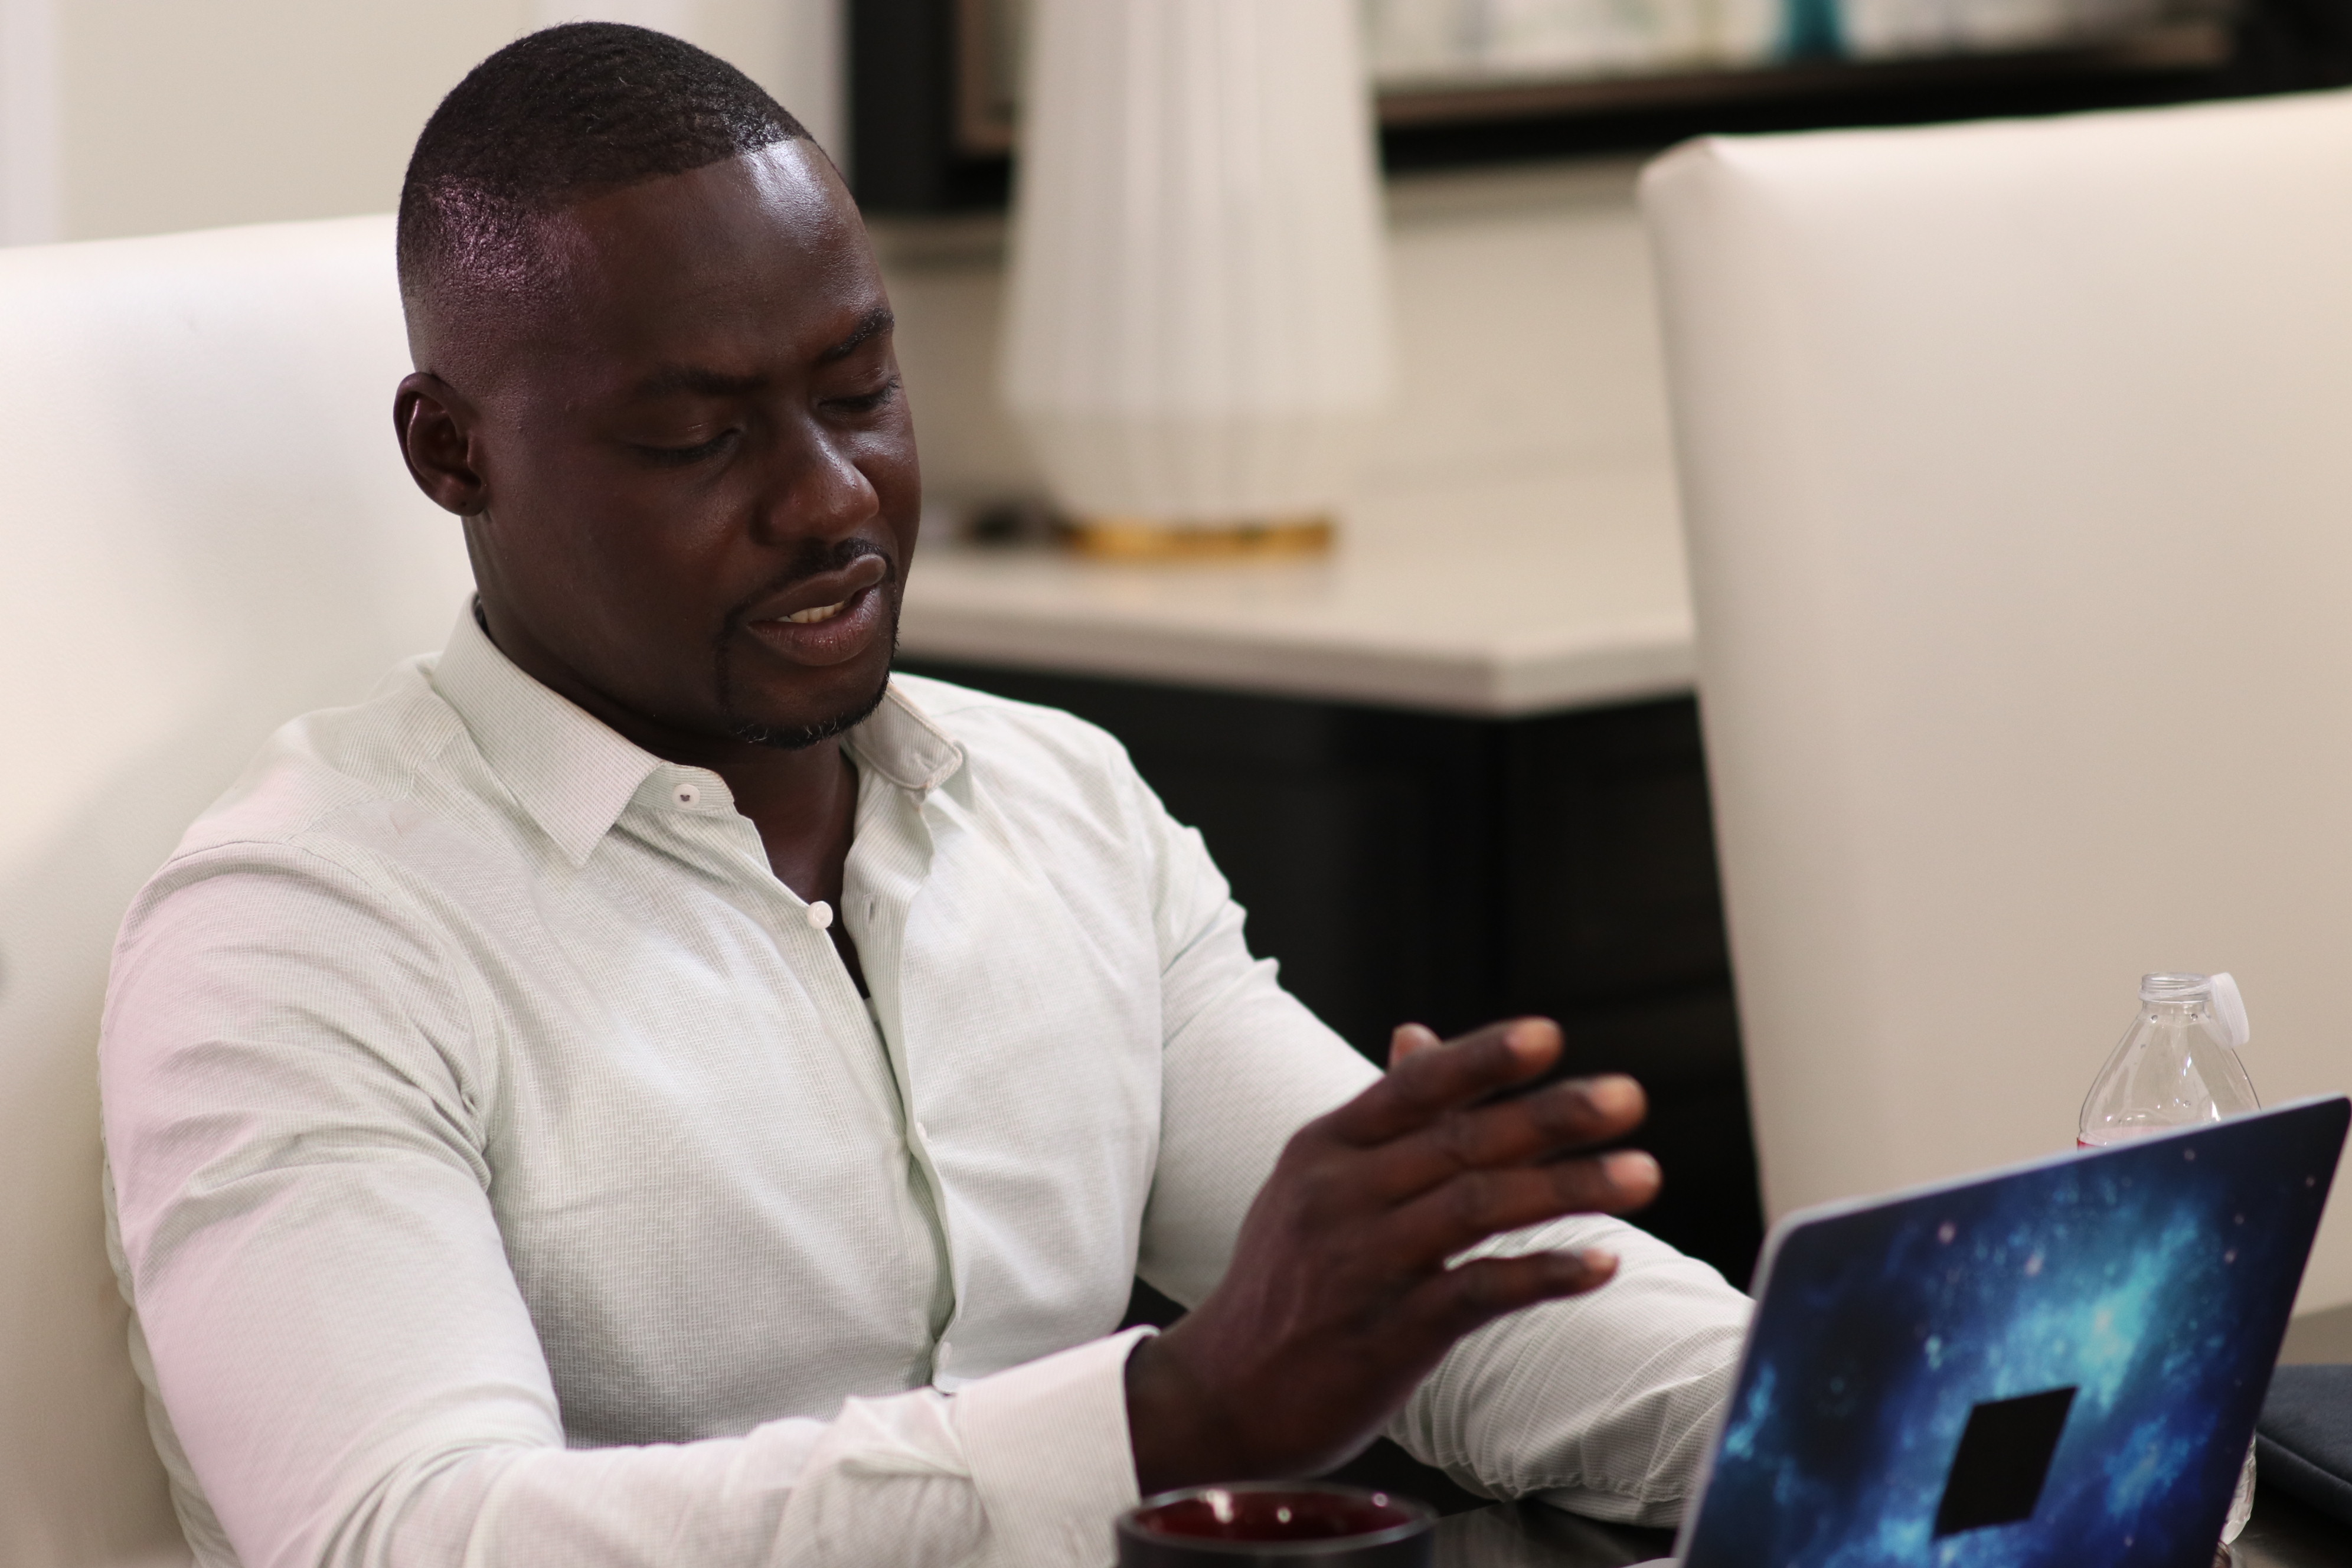 Chris Attoh as "Will"